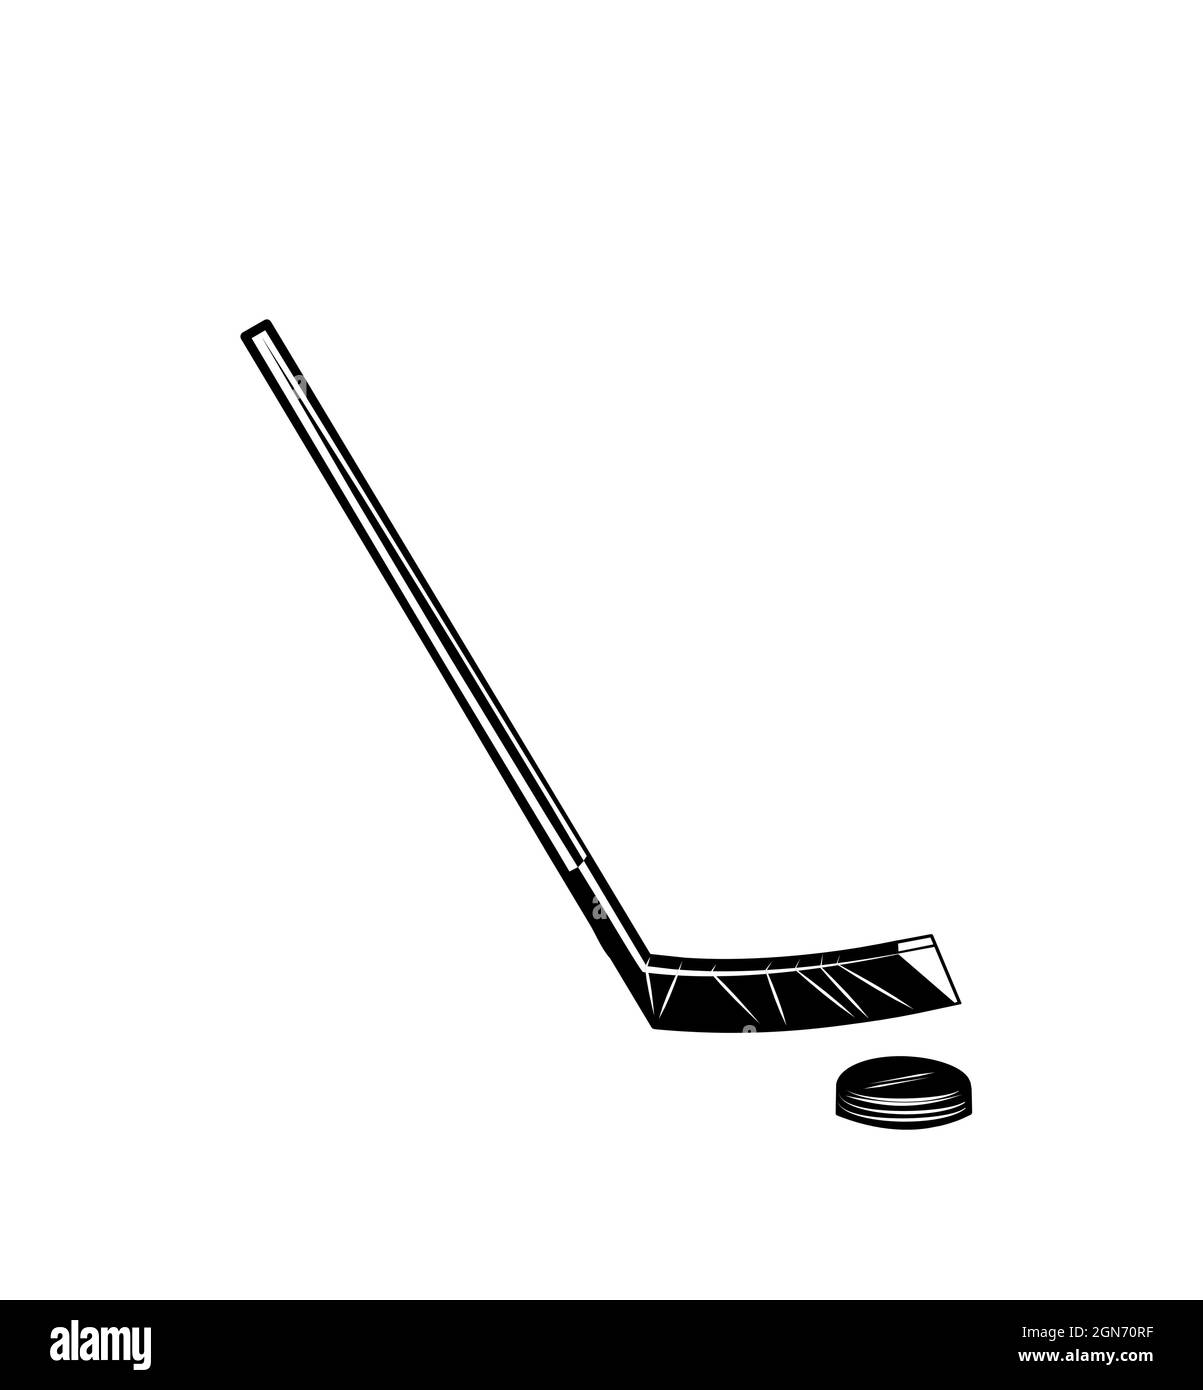 Field Hockey Stick Icon White Back Stock Vector by ©AndrOm 235999876